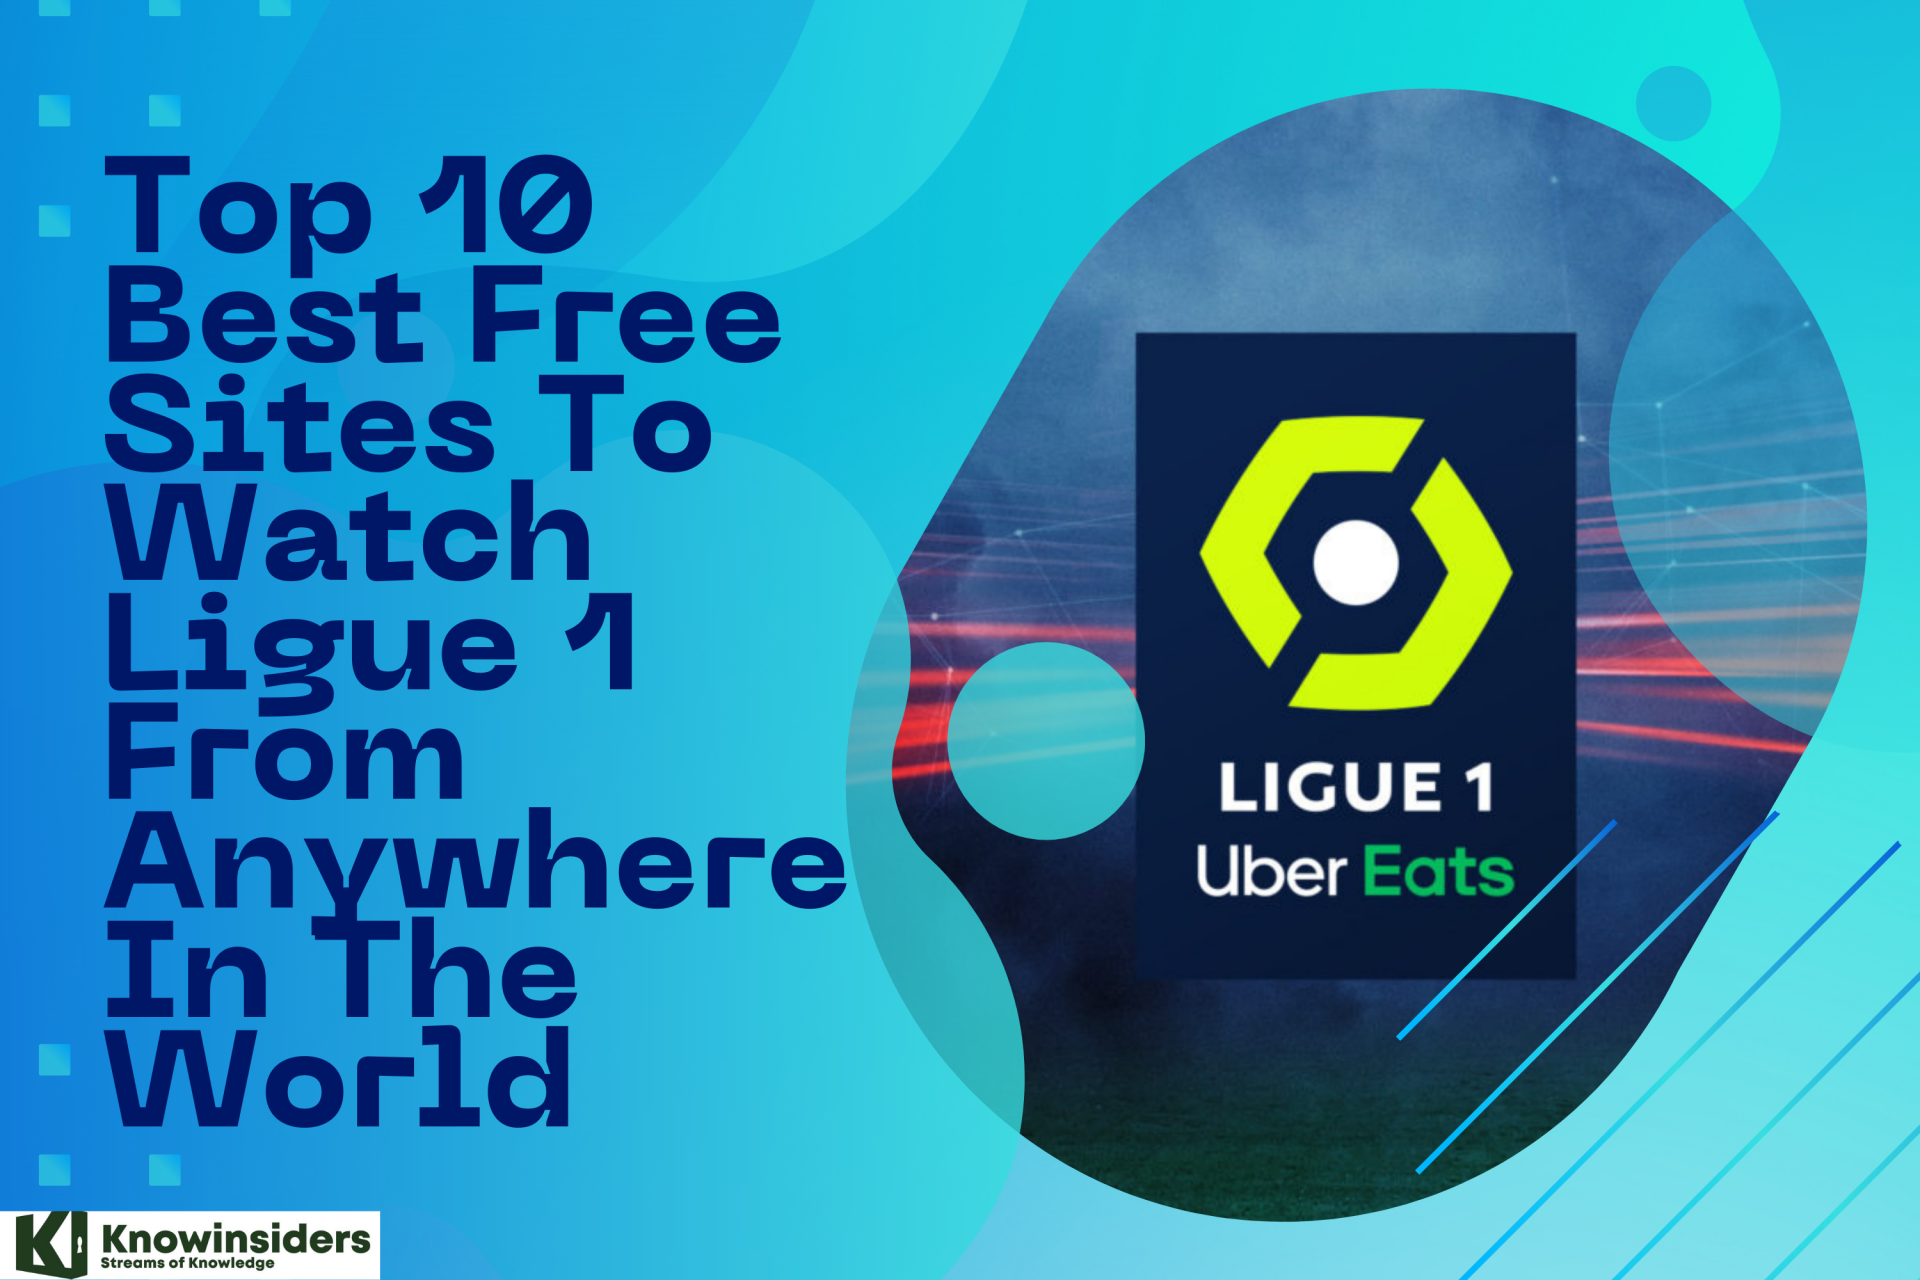 Top 10 Best Free Sites To Watch Ligue 1 Online From Anywhere In The World